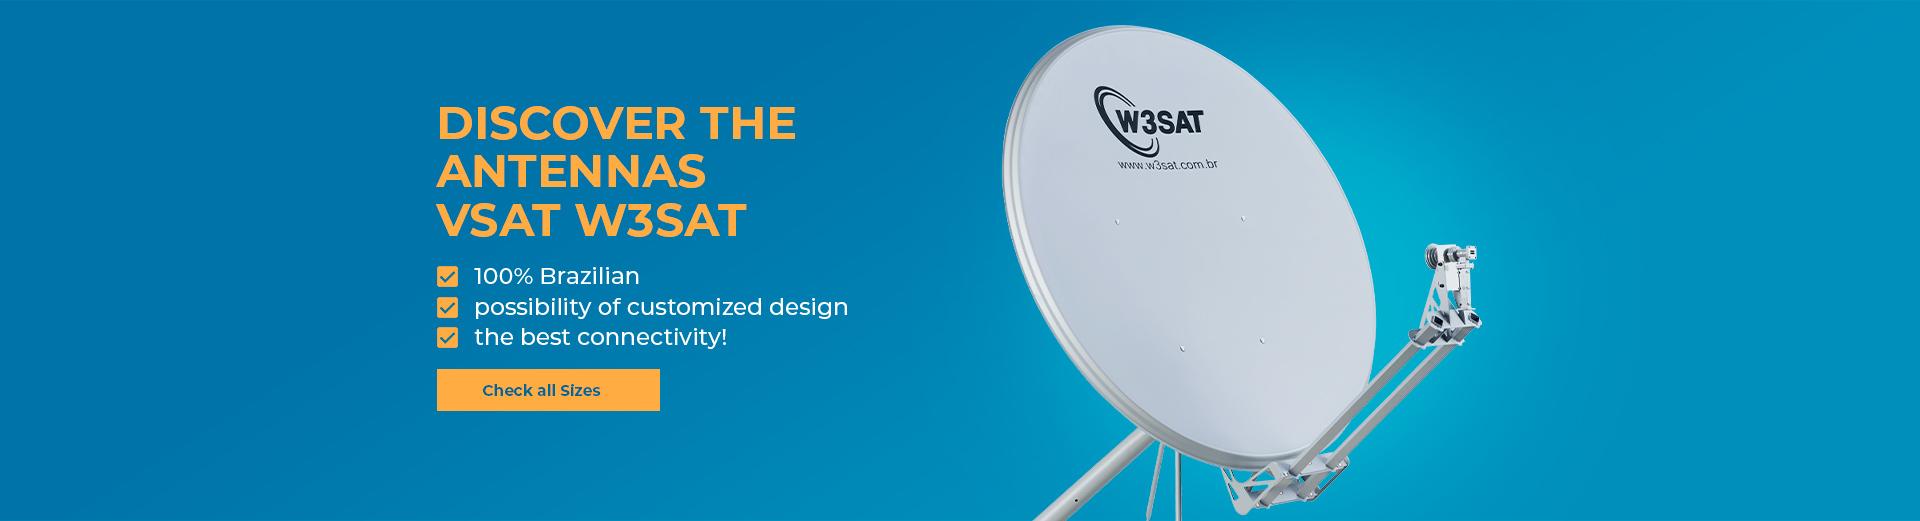 Discover The Antennas Vsat W3Sat